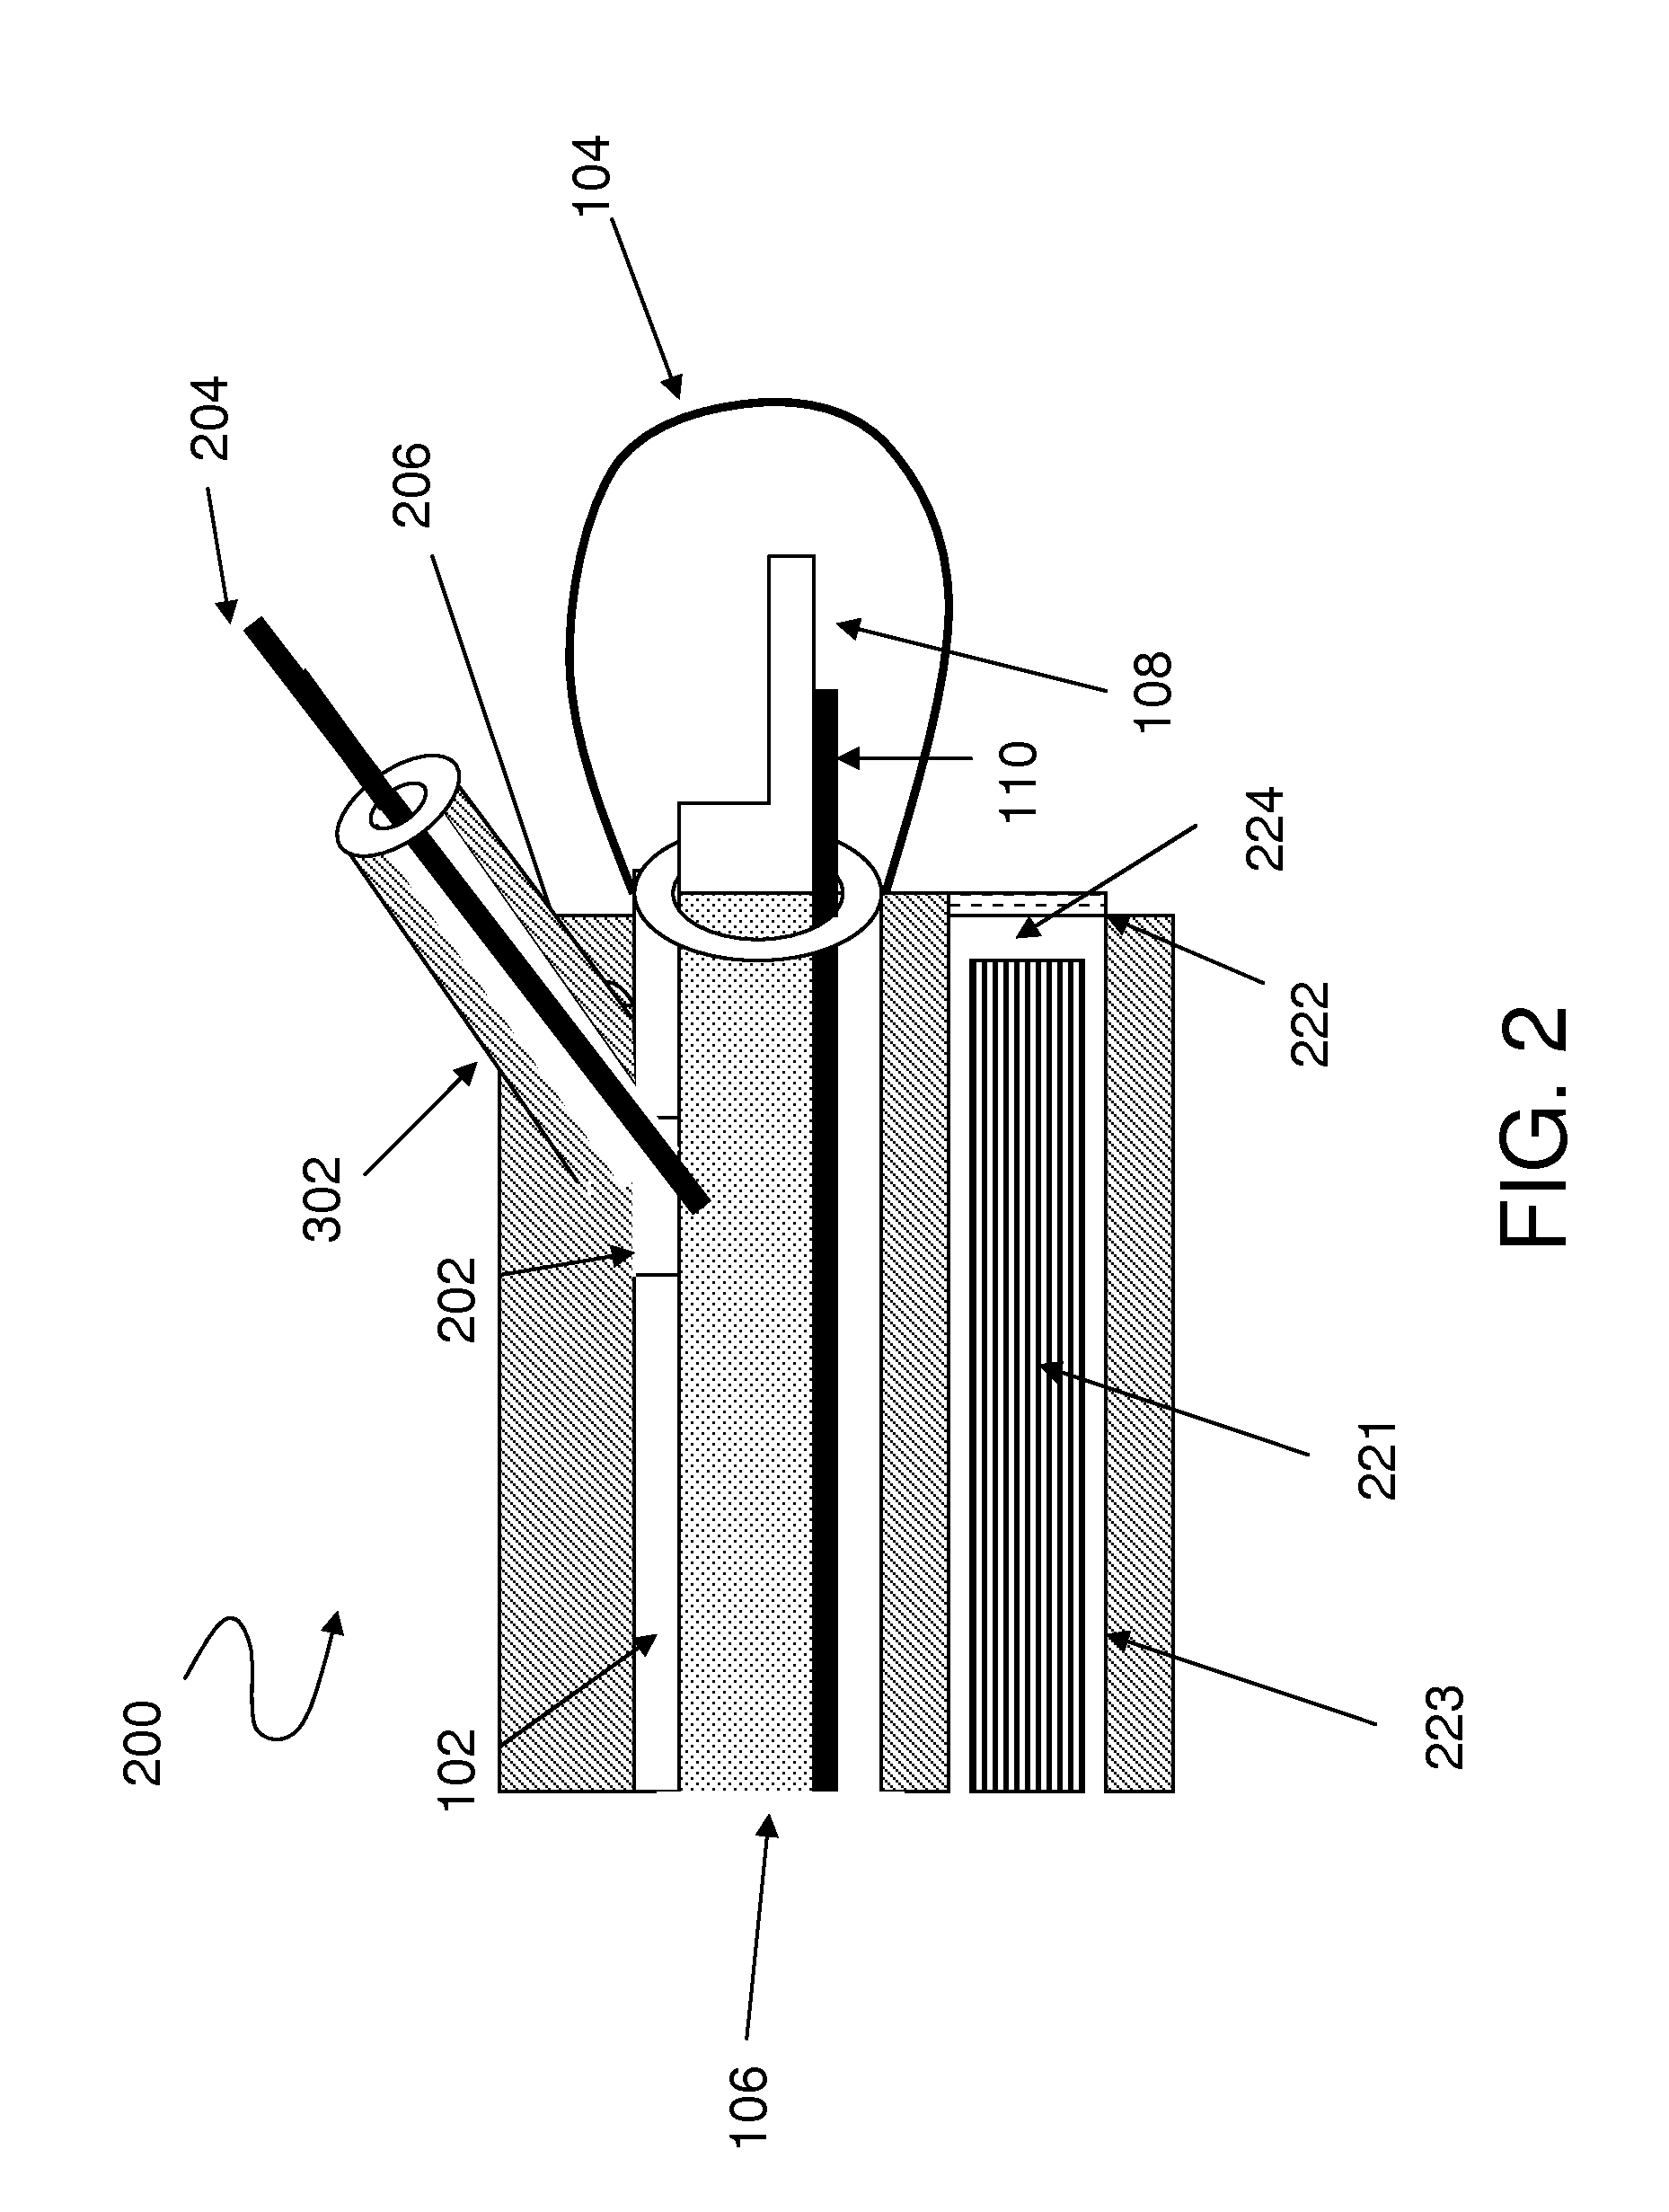 Method and system for intrabody imaging